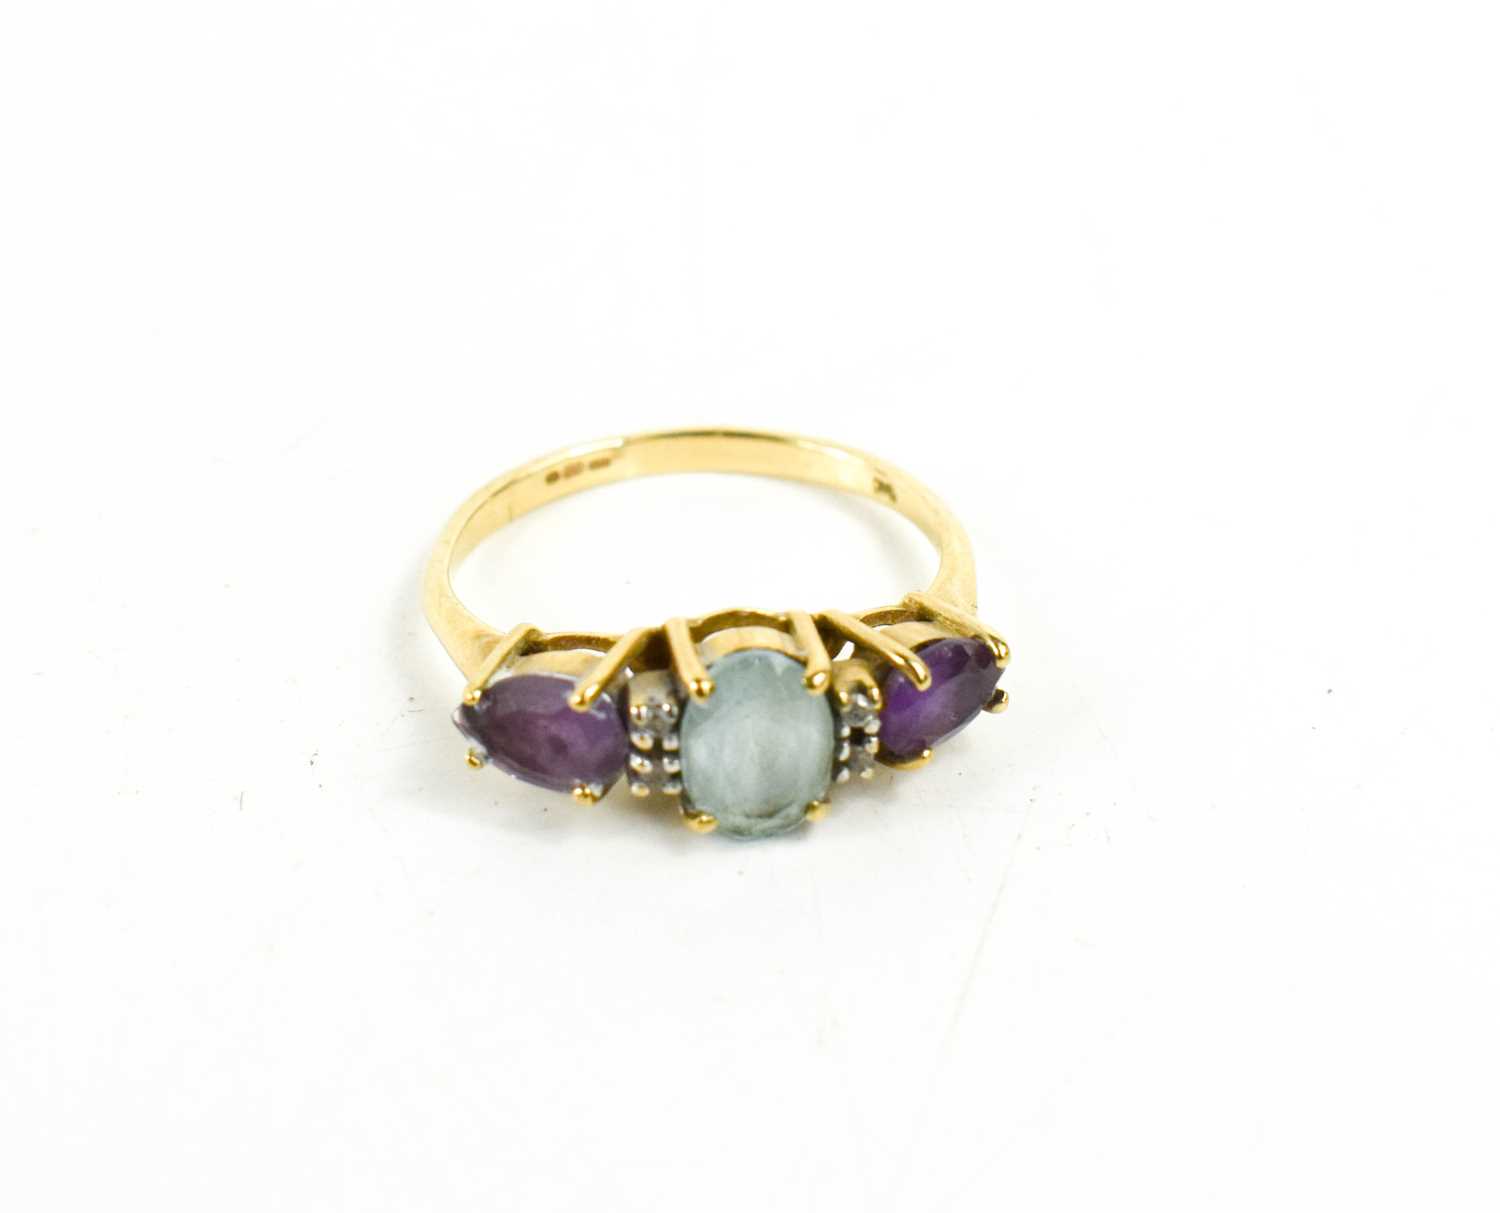 A 9ct gold, amethyst, aquamarine and diamond brilliant ring, the oval aquamarine, of approximately